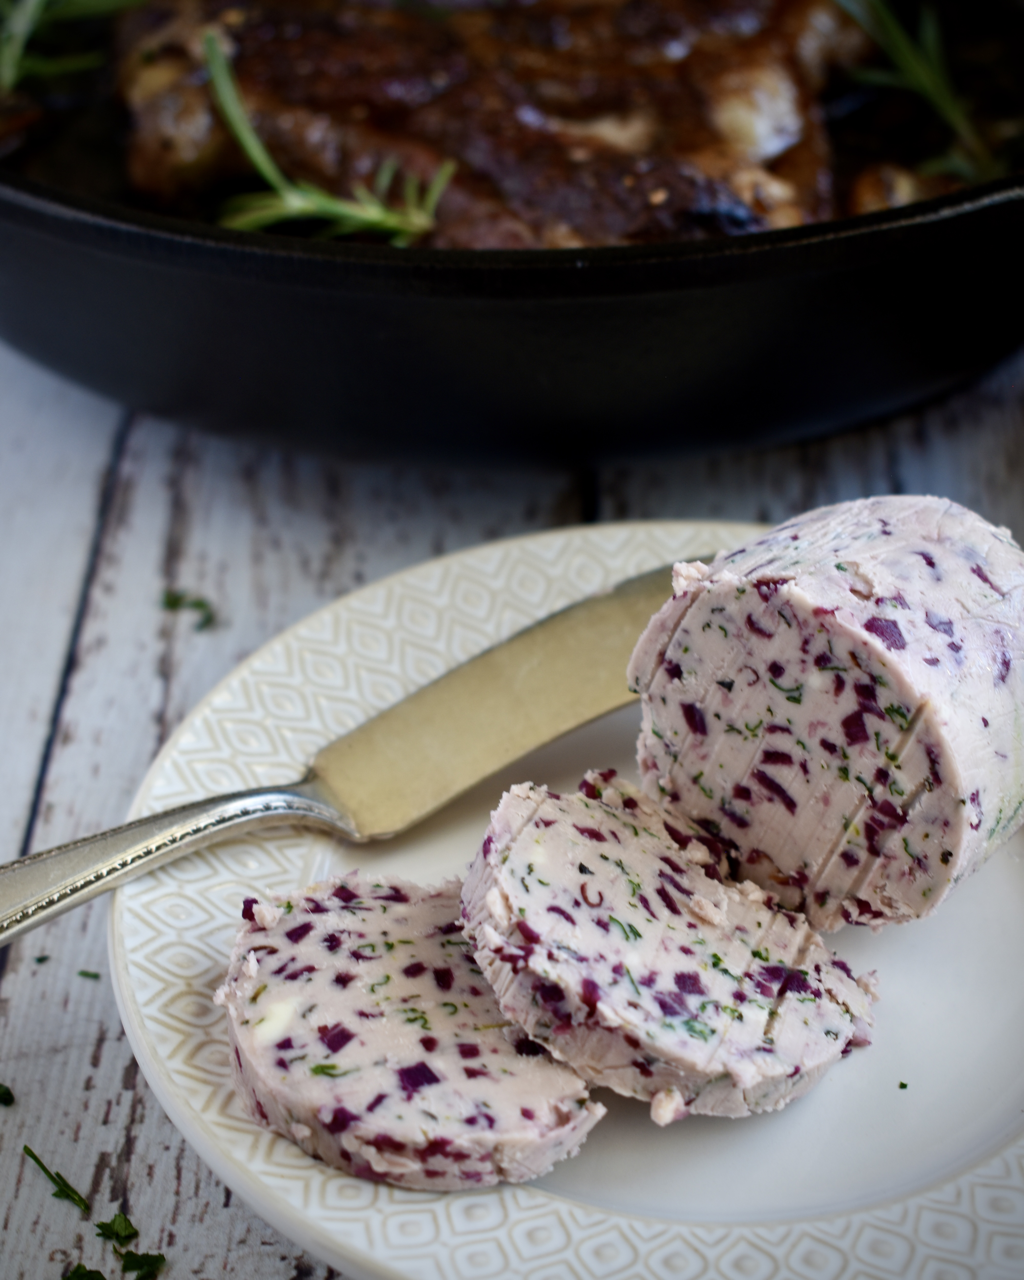 Pan-Seared Ribeye Steaks with Red Wine Shallot Butter 